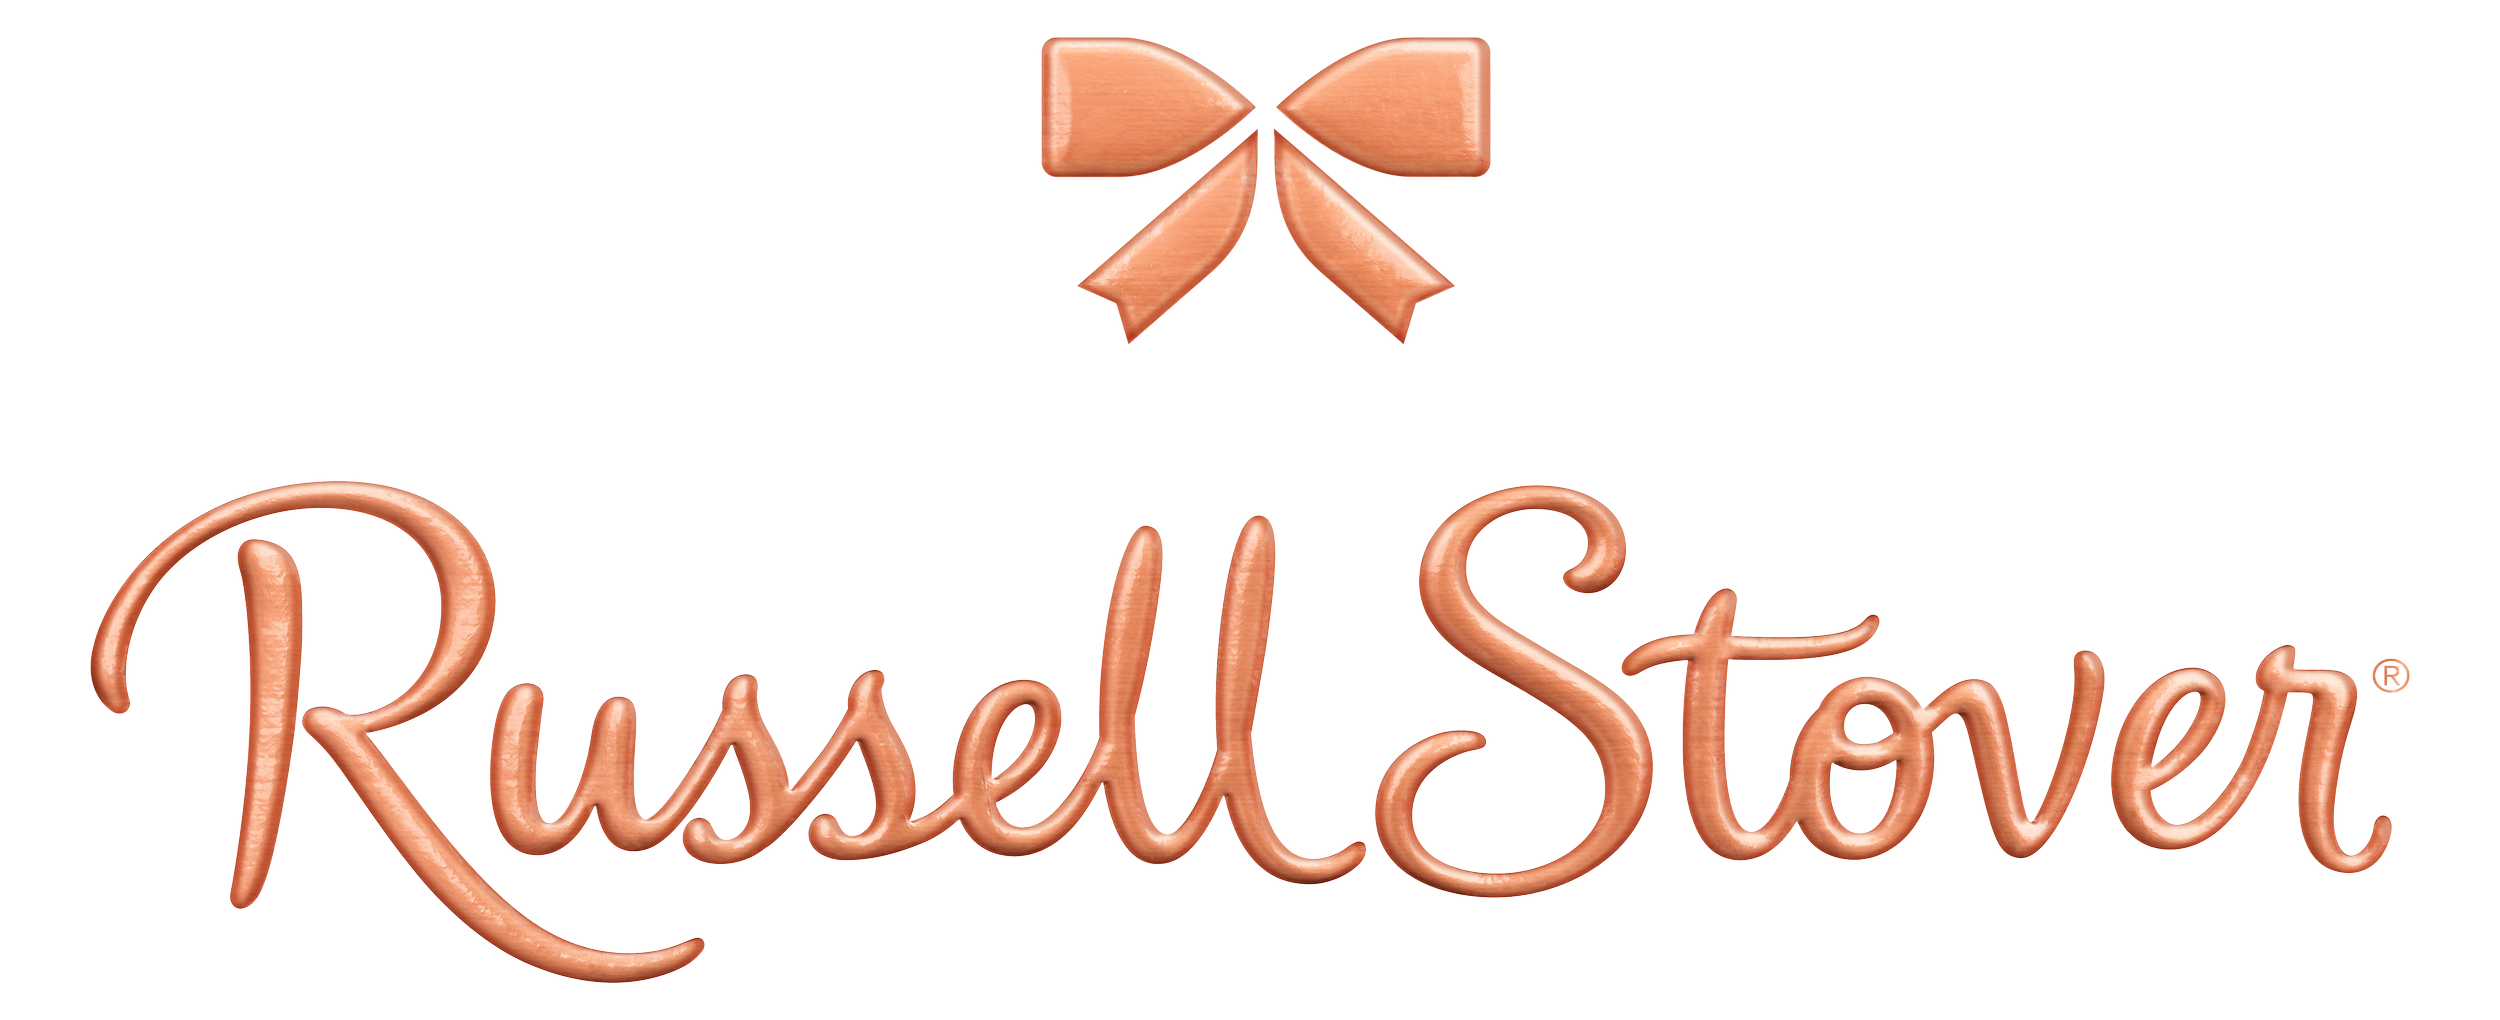 RussellStover_CopperFoil_RSLogoBow-7557x3082-7cd49ab.png